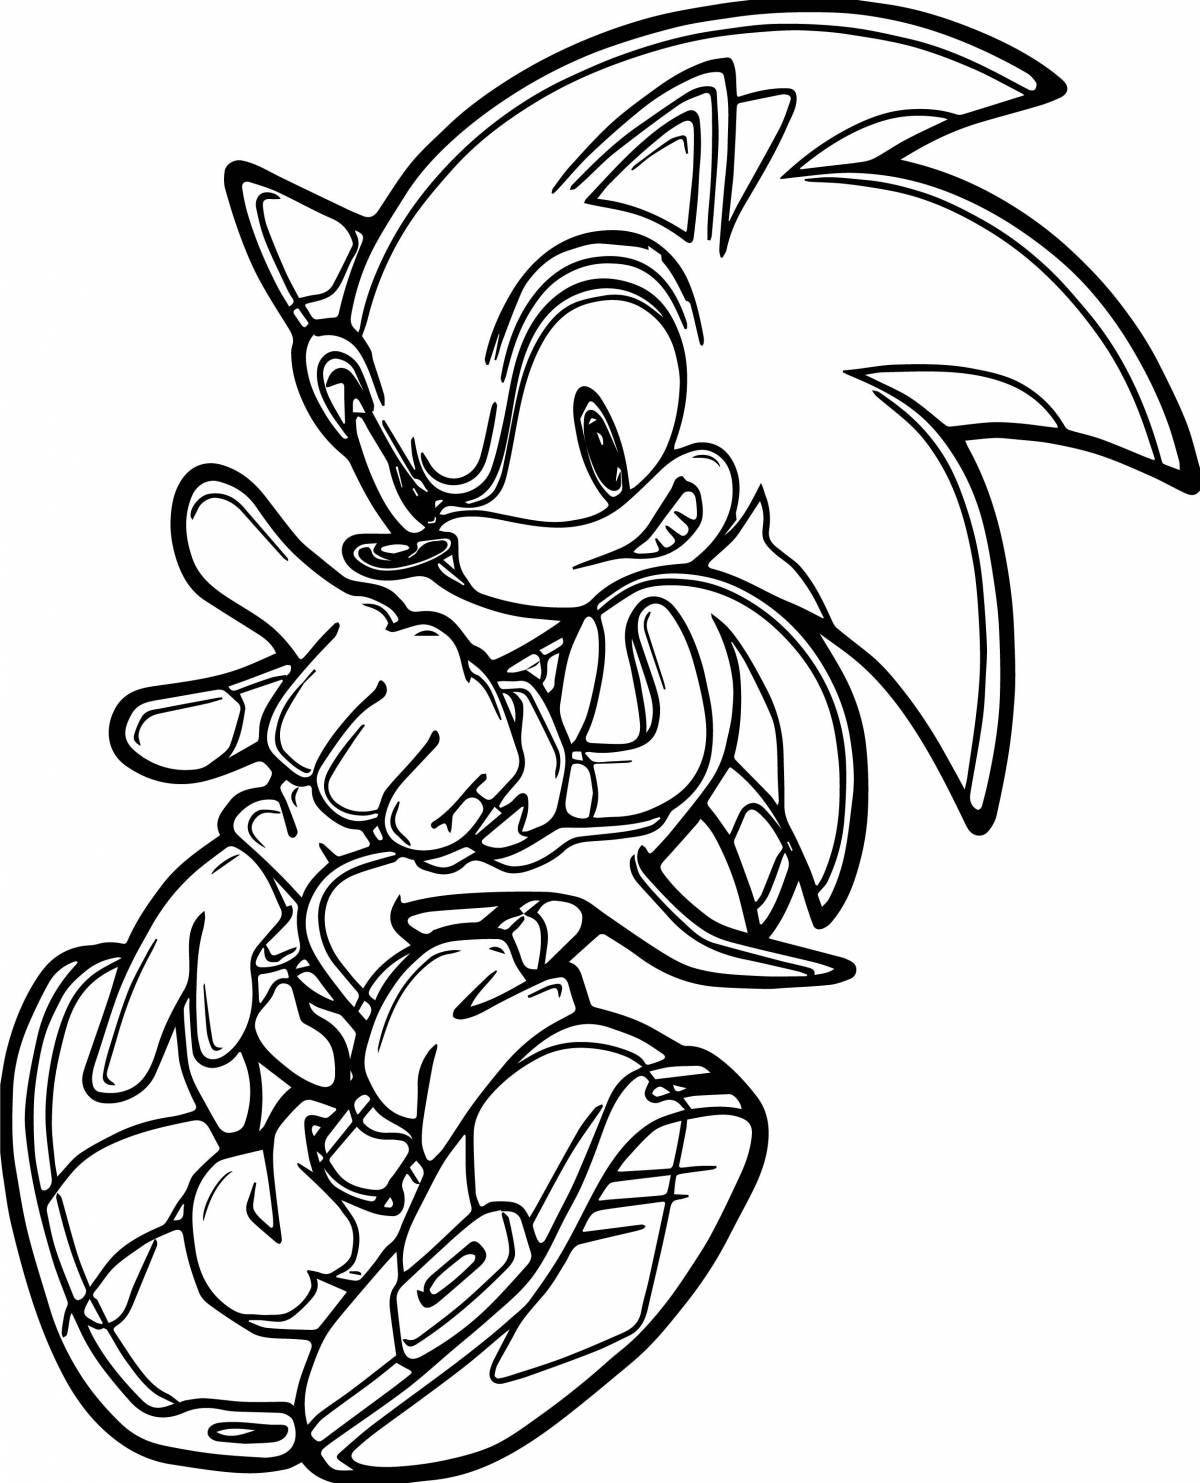 Evil sonic coloring pages - disgusting